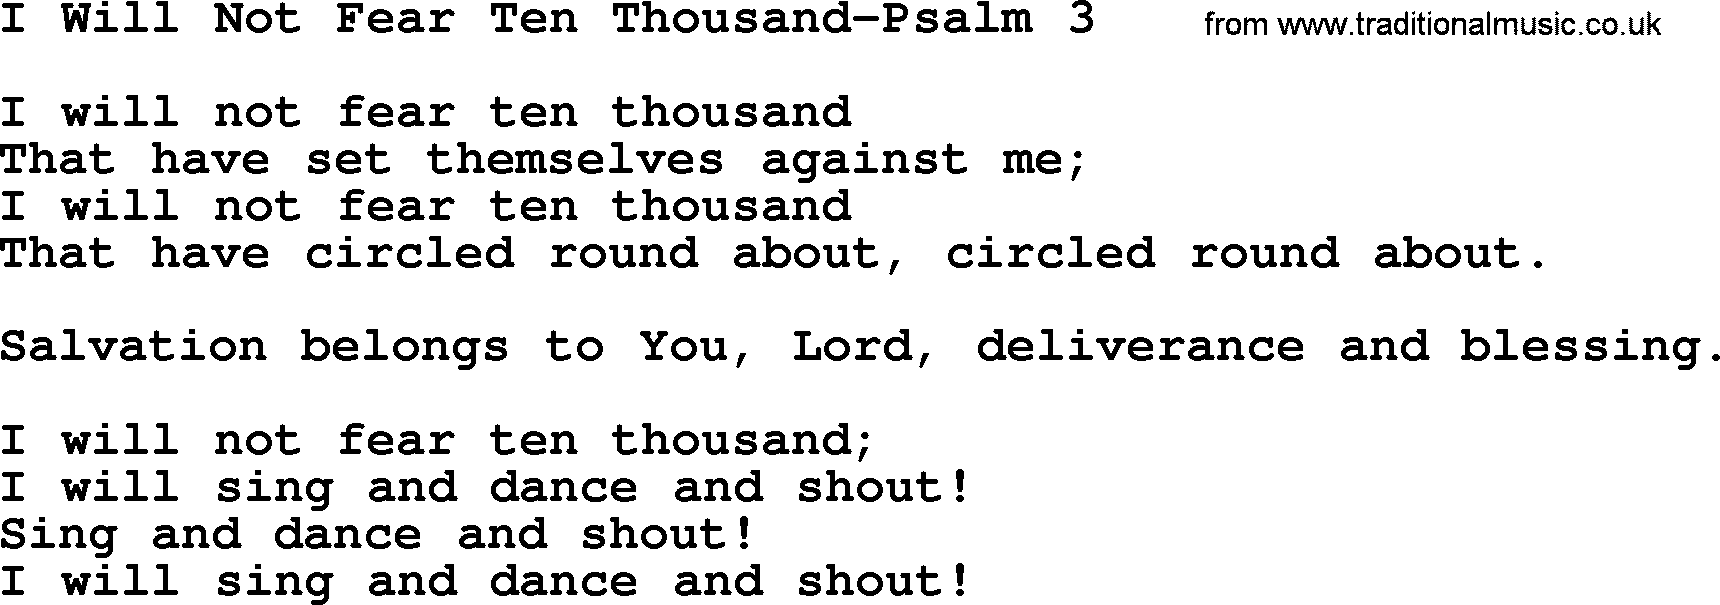 Hymns from the Psalms, Hymn: I Will Not Fear Ten Thousand-Psalm 3, lyrics with PDF